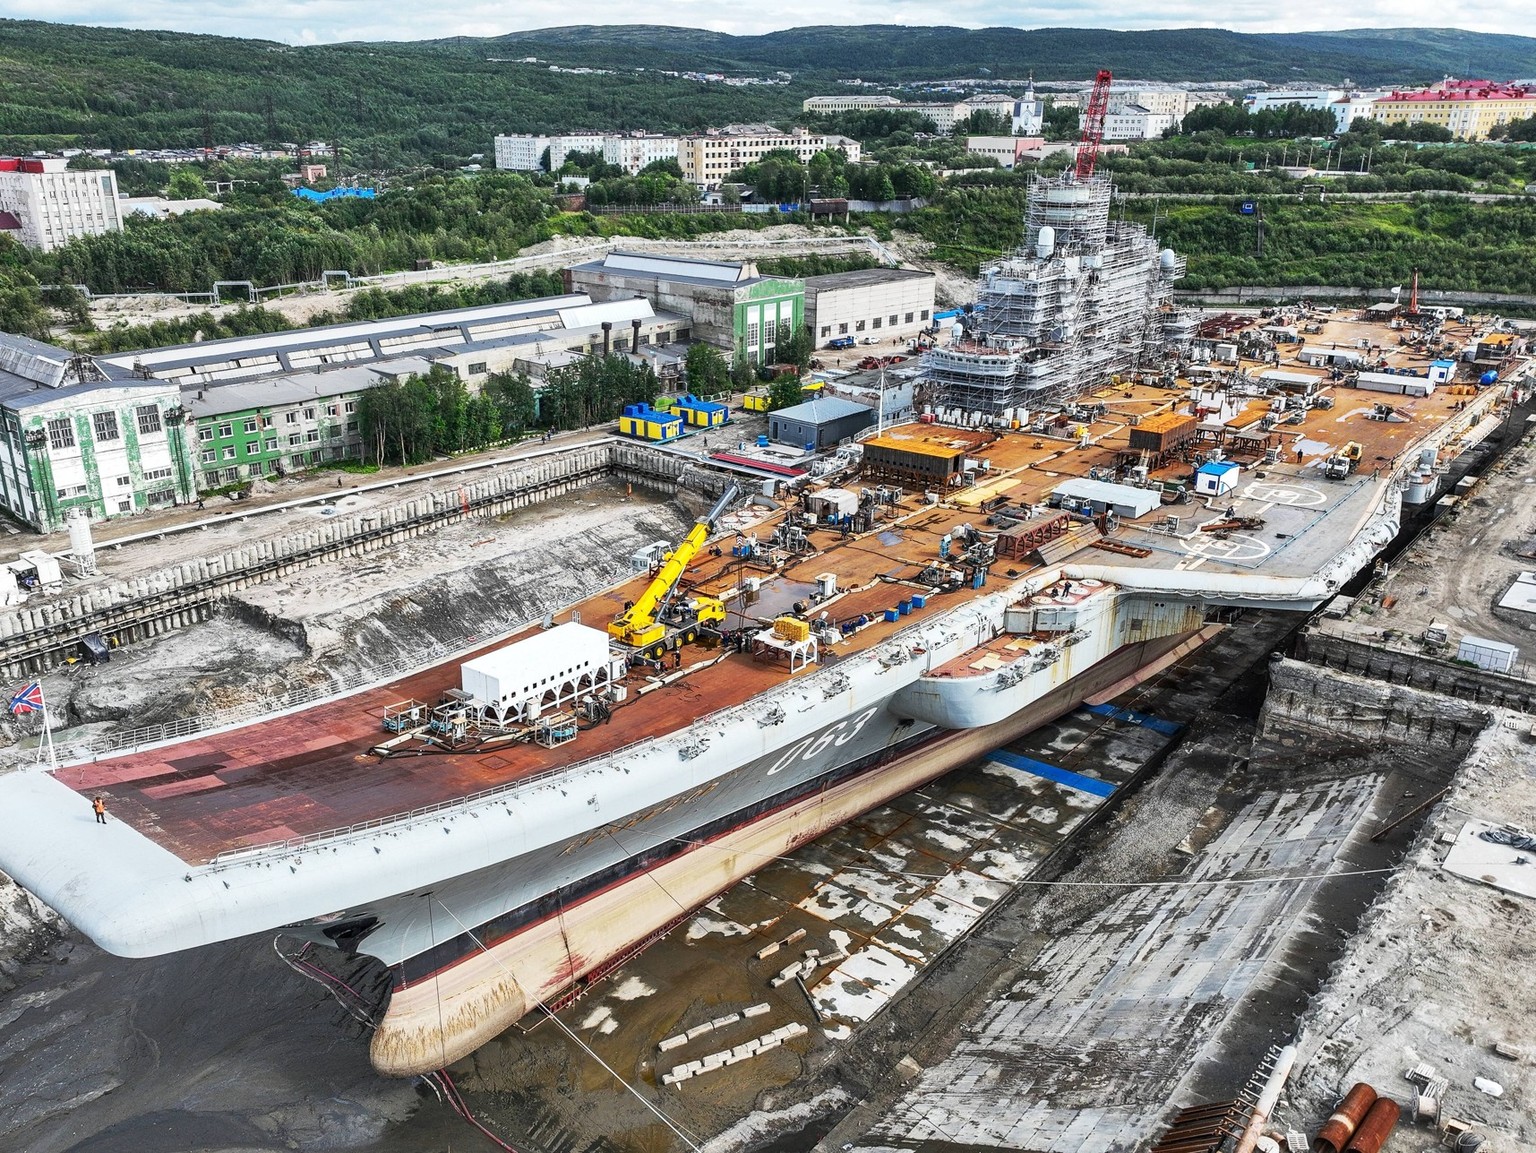 Russia Navy Aircraft Carrier Repairs 8248873 05.08.2022 The Admiral Kuznetsov Aircraft Carrier is docked at the 35th ship-repair plant in Murmansk, Russia. The vessel is undergoing repairs and moderni ...